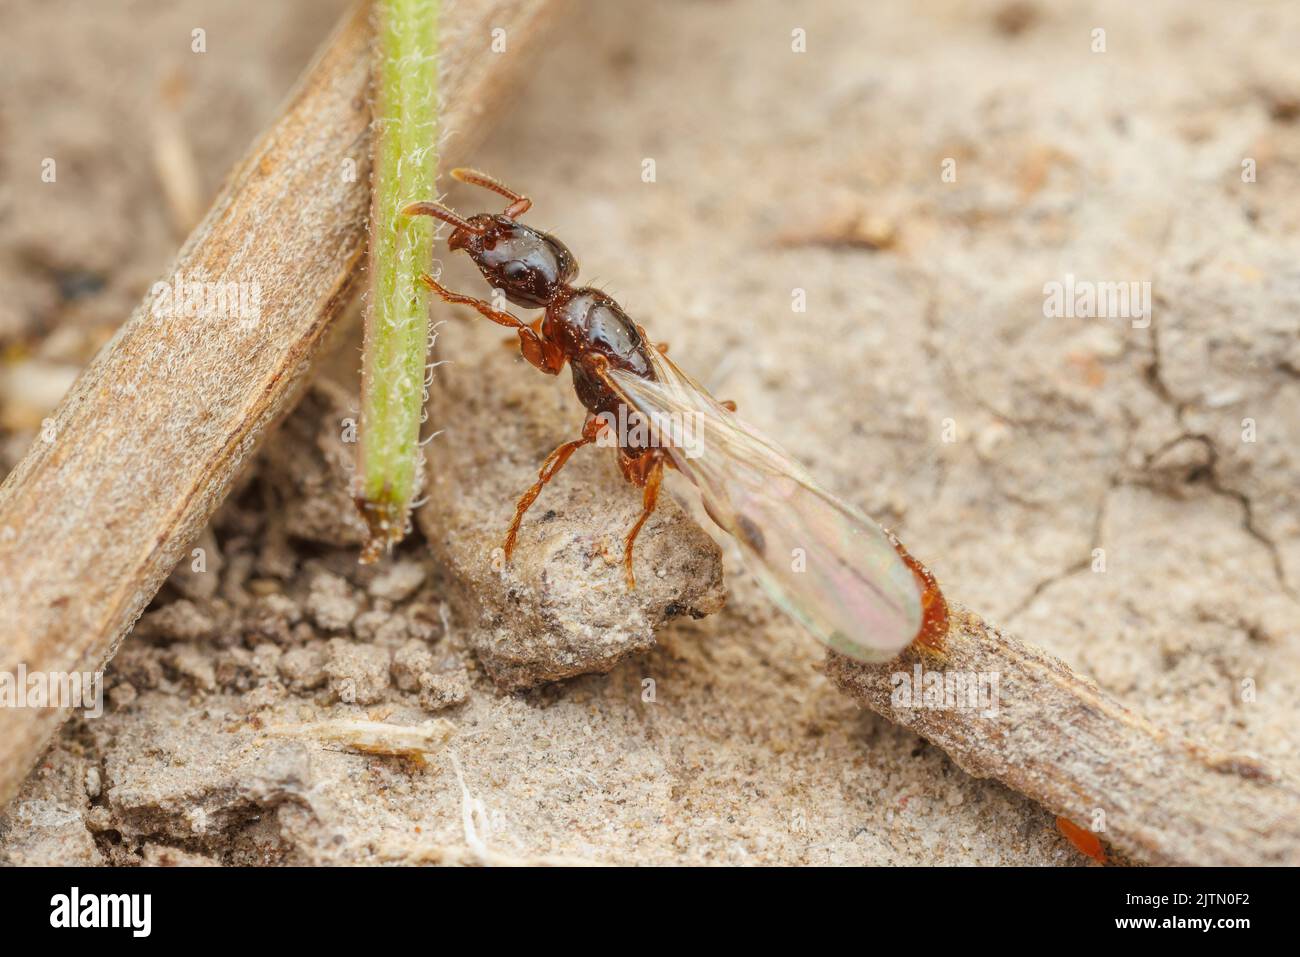 A Cerapachyine Army Ant (Acanthostichus sp.) Queen on a nuptial flight. Stock Photo